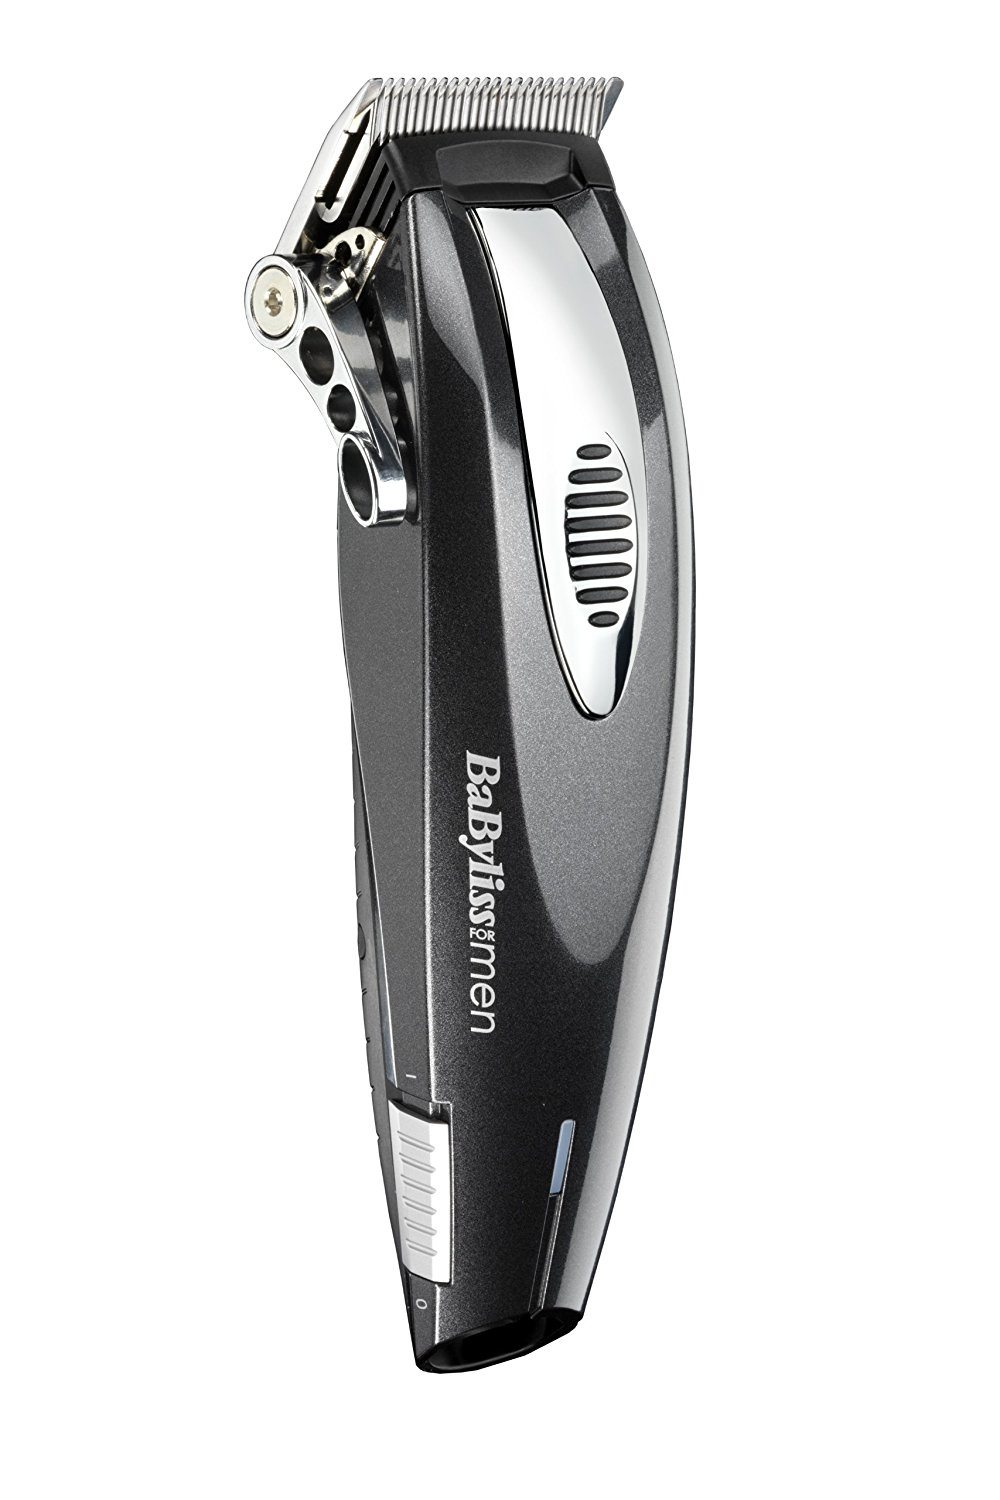 number three rated babyliss hair clippers